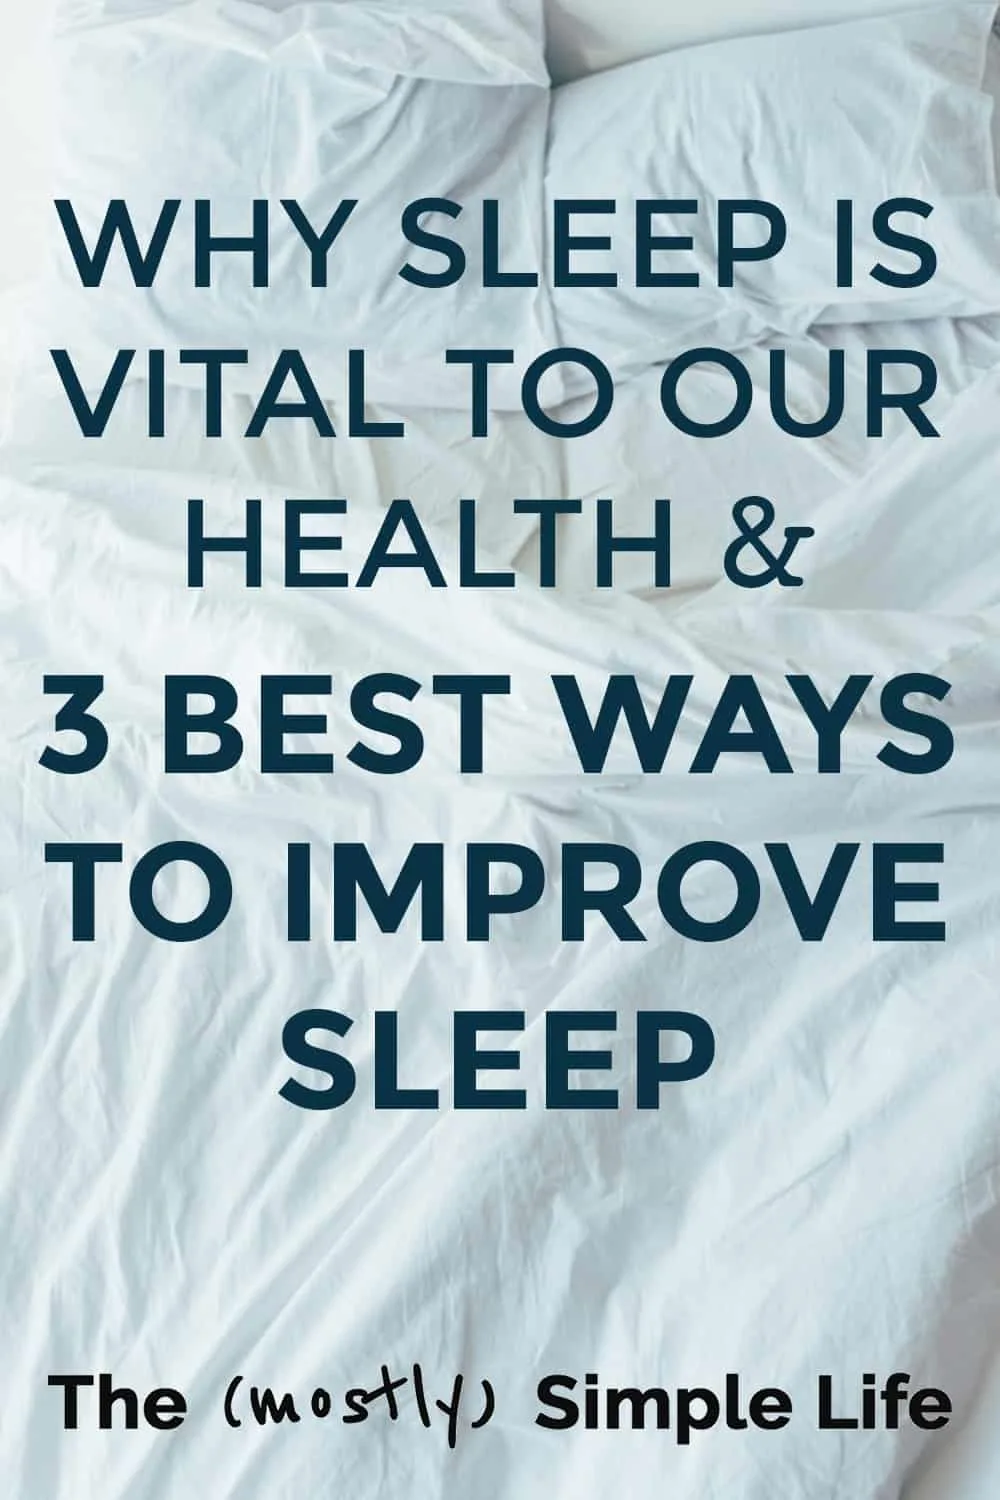 Why Sleep is Vital for Good Health and Fitness (And How to Sleep Better)